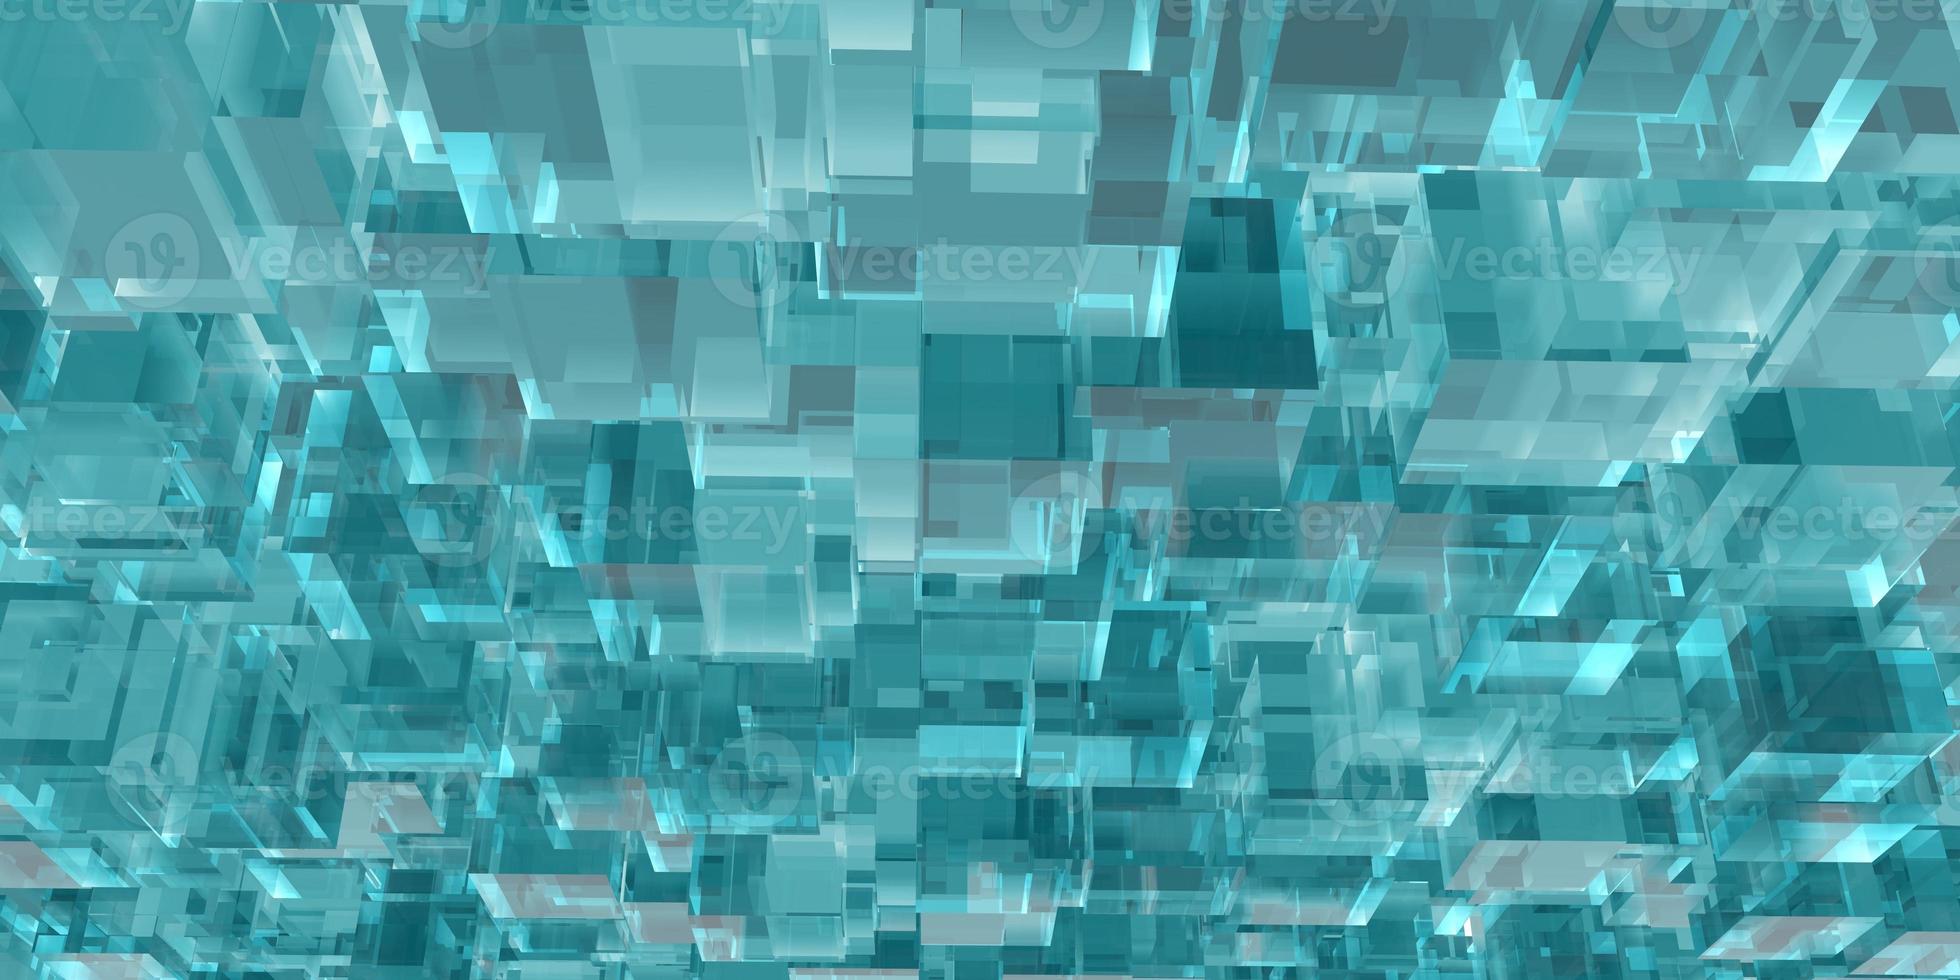 abstract art cyan crystals cube shape 3D rendered image background image photo